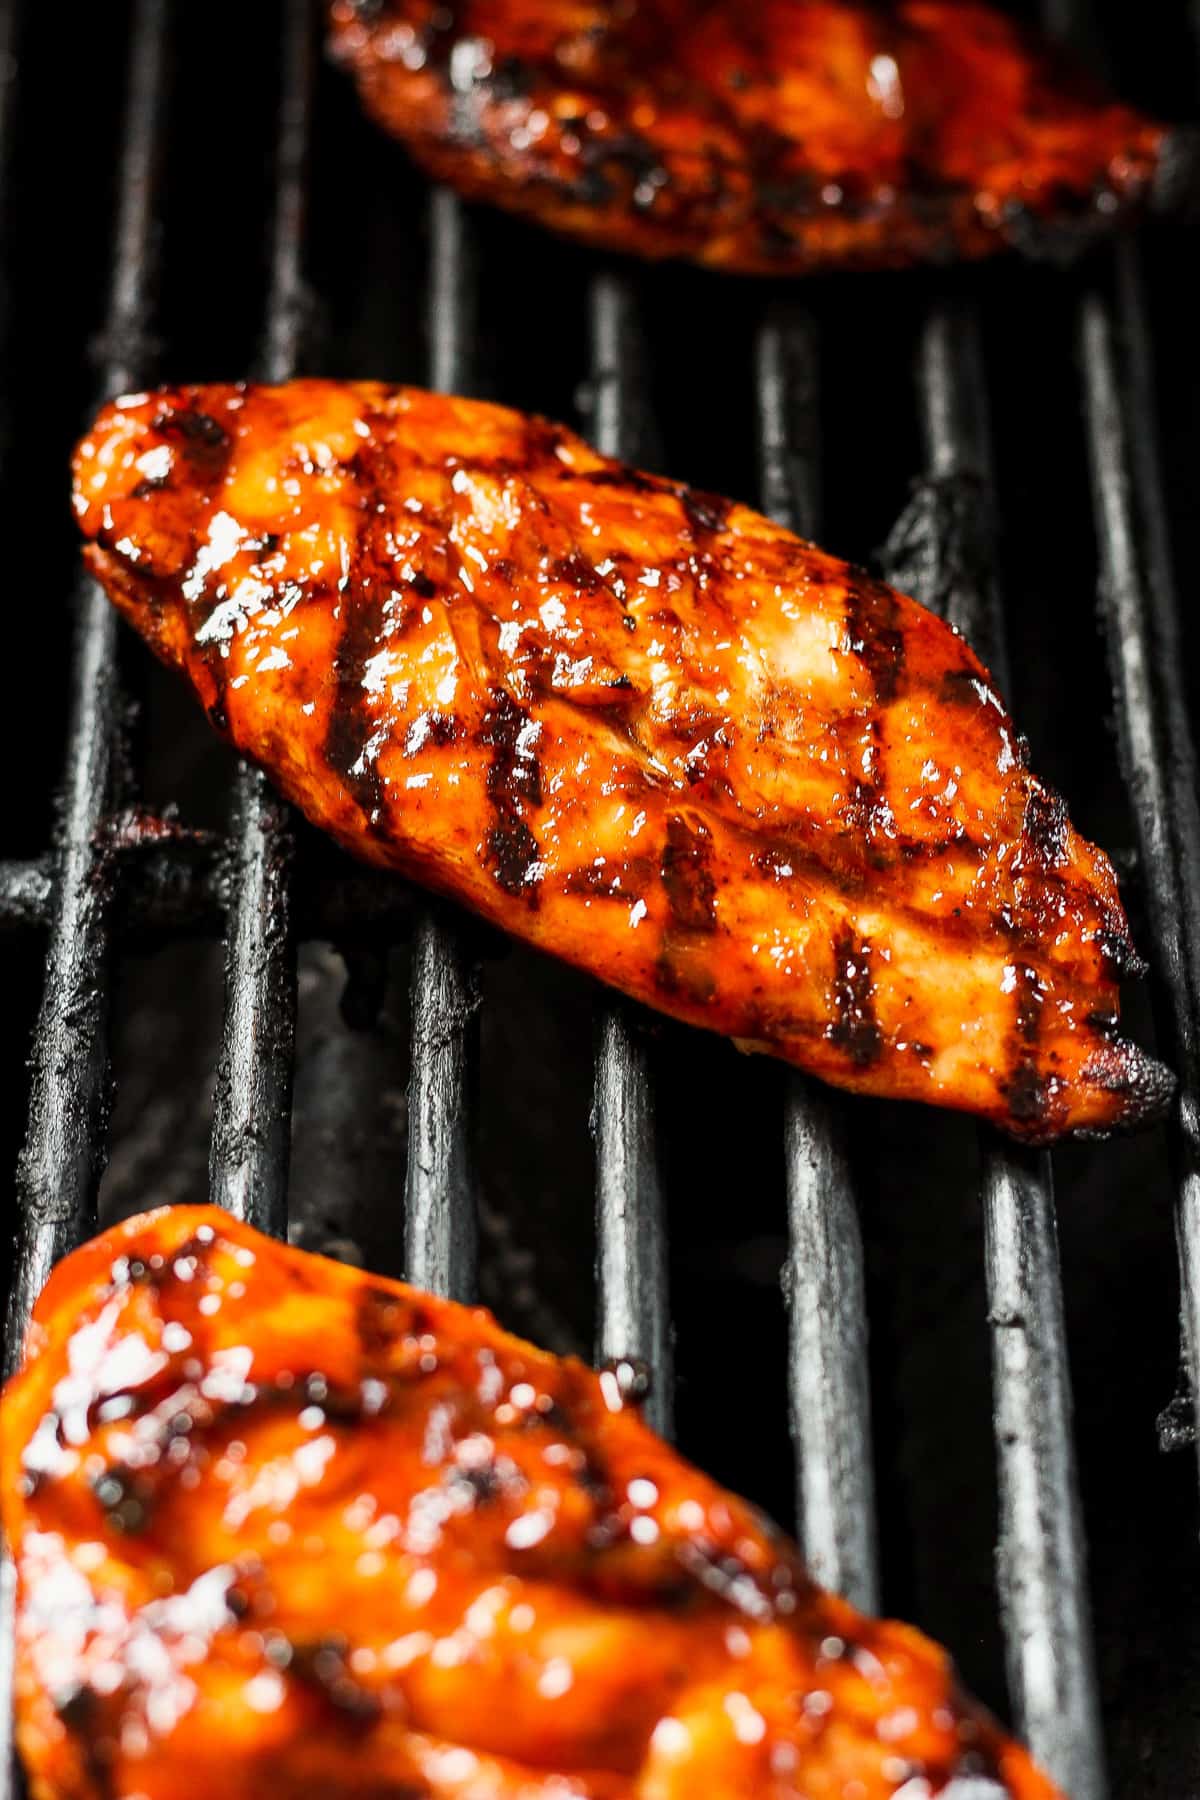 Grilled BBQ Chicken Breast Recipe - Fit Foodie Finds